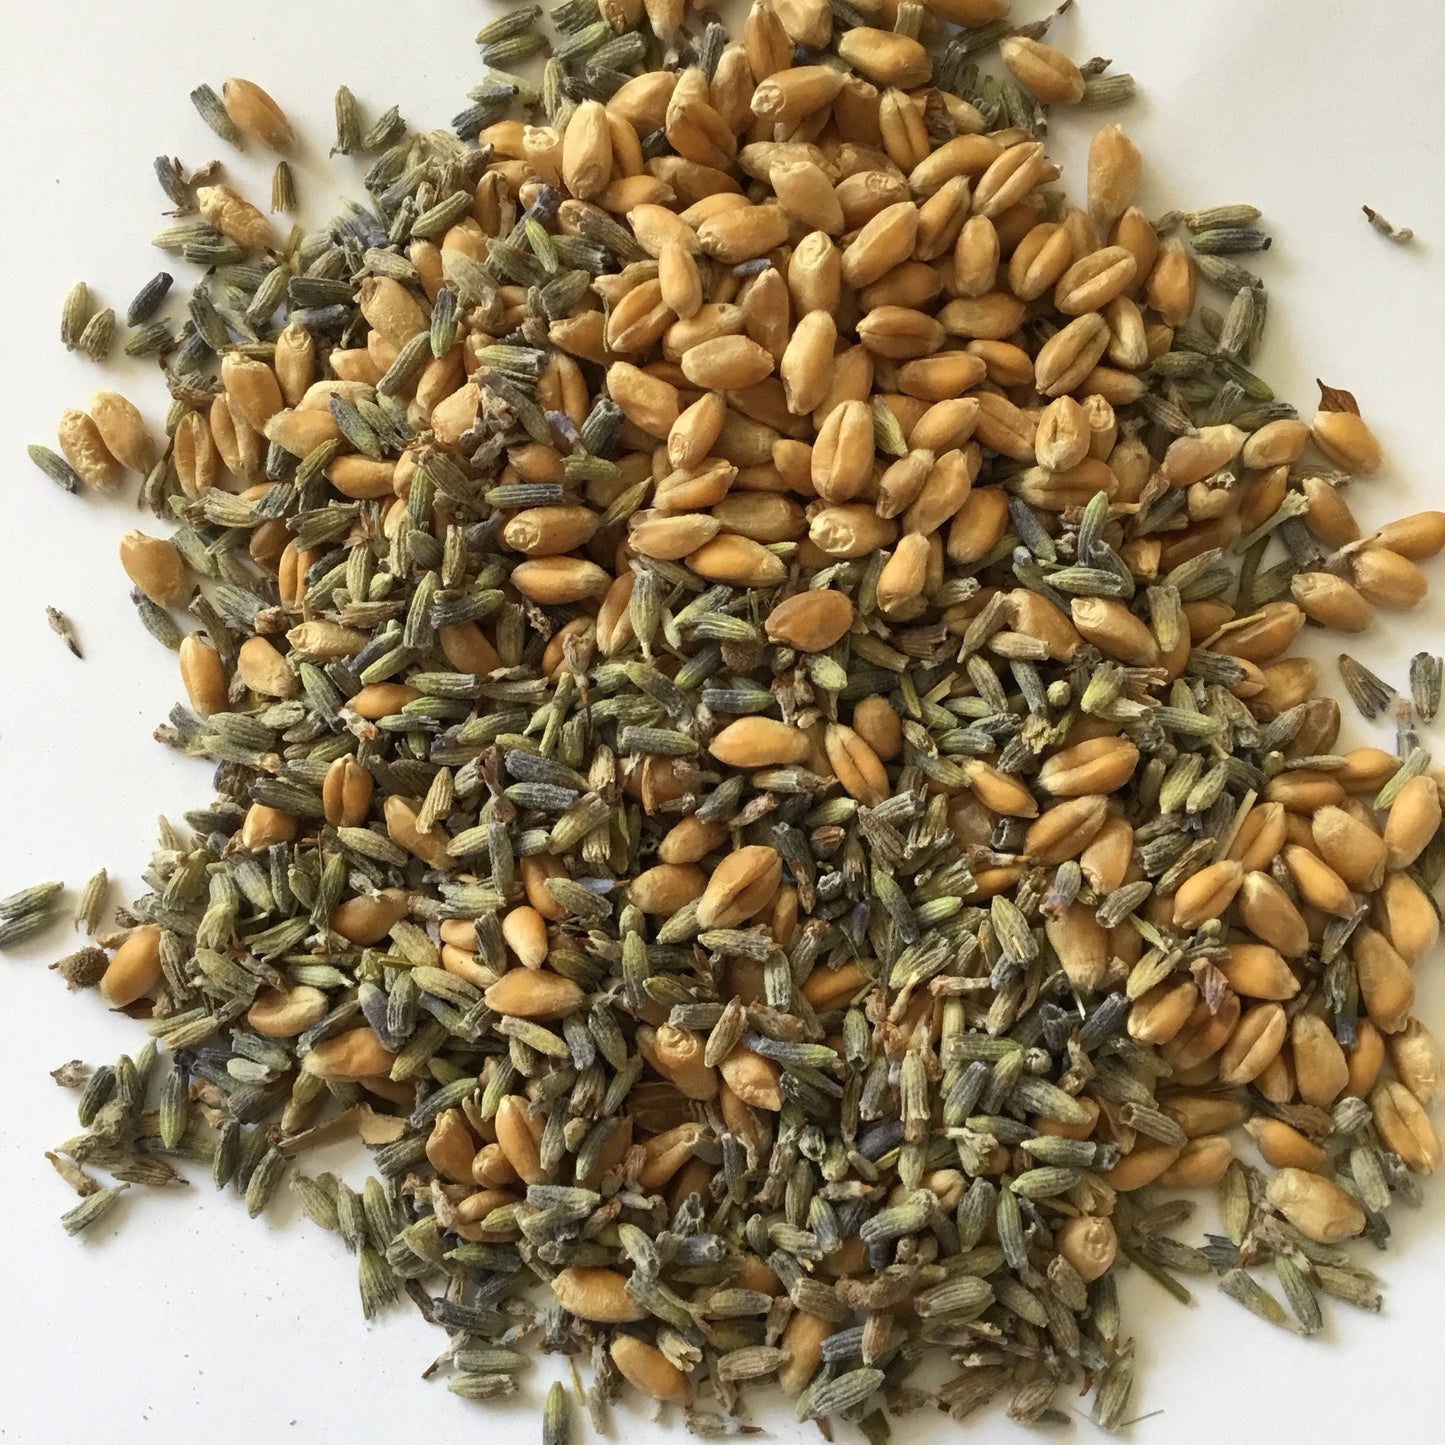 Ingredients for lavender scented wheat bags